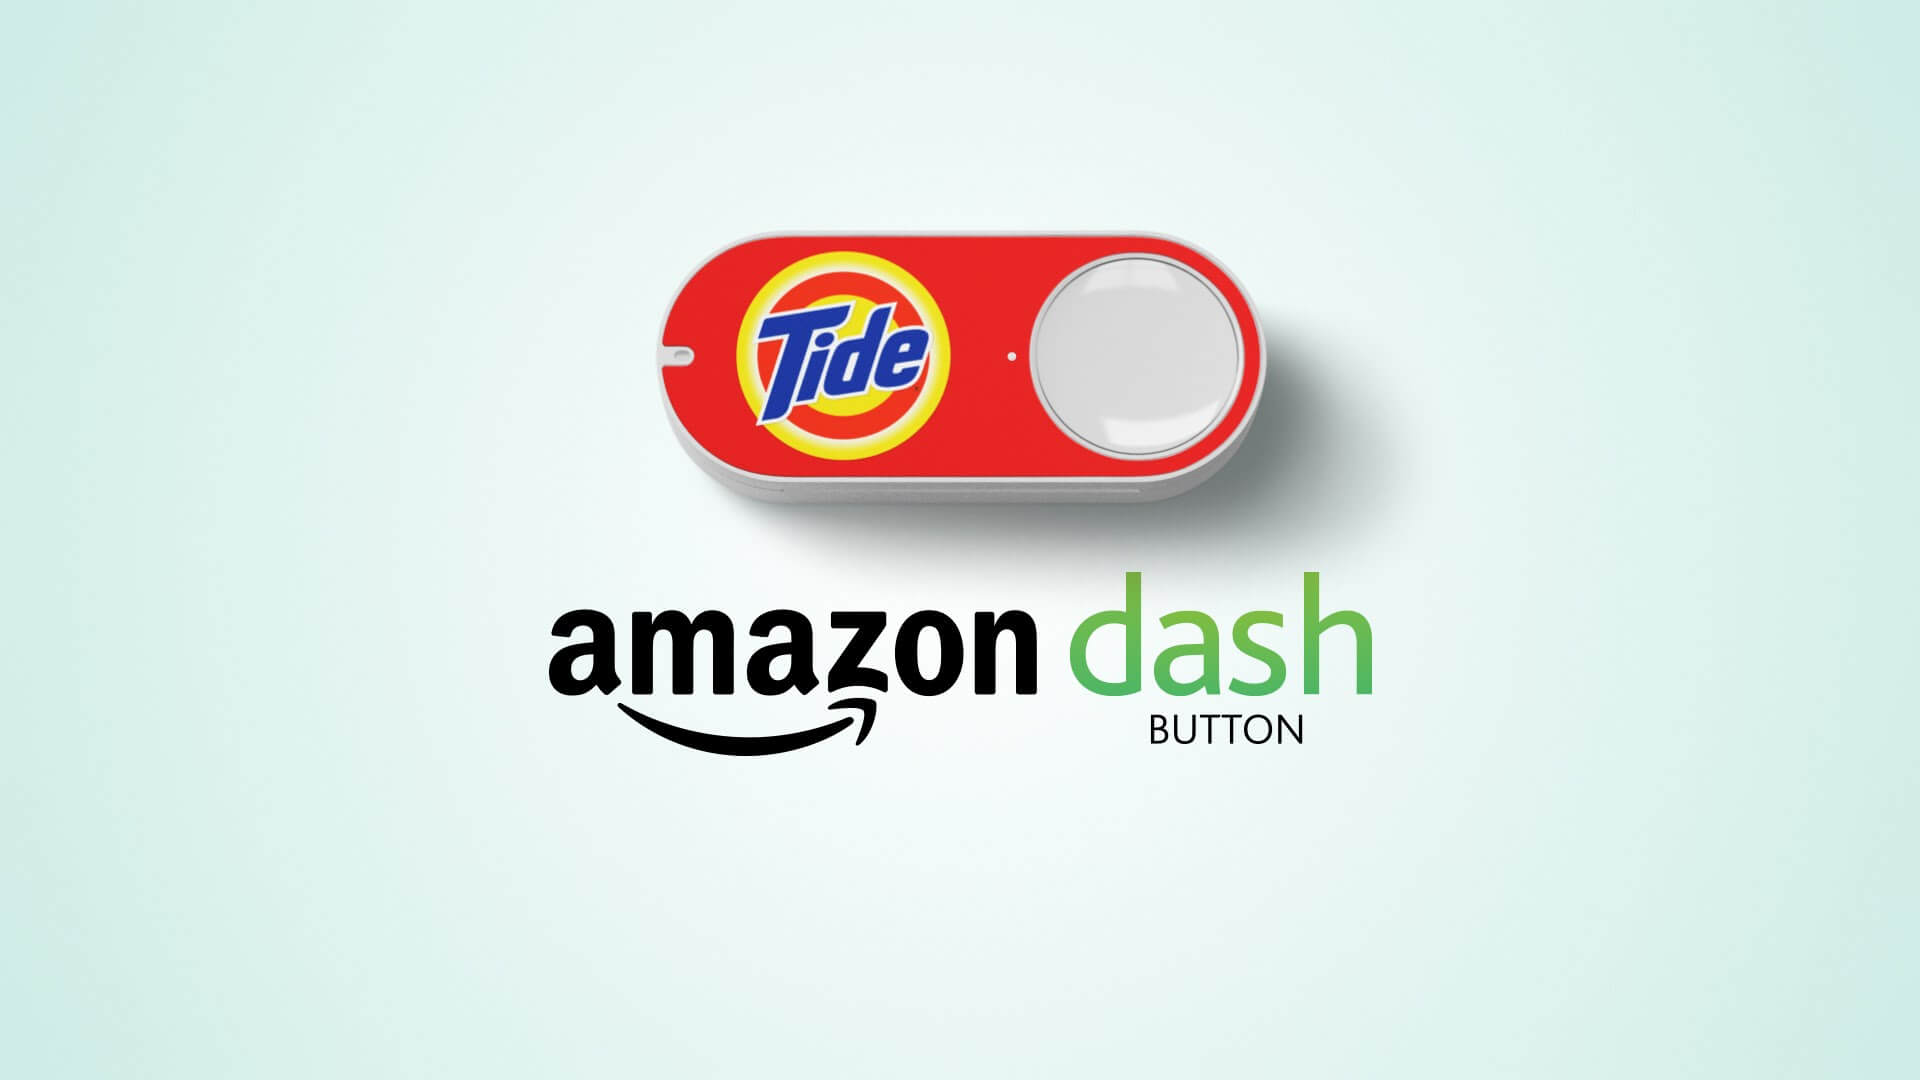 Amazon Added 50 New Brands to its Dash Button Program